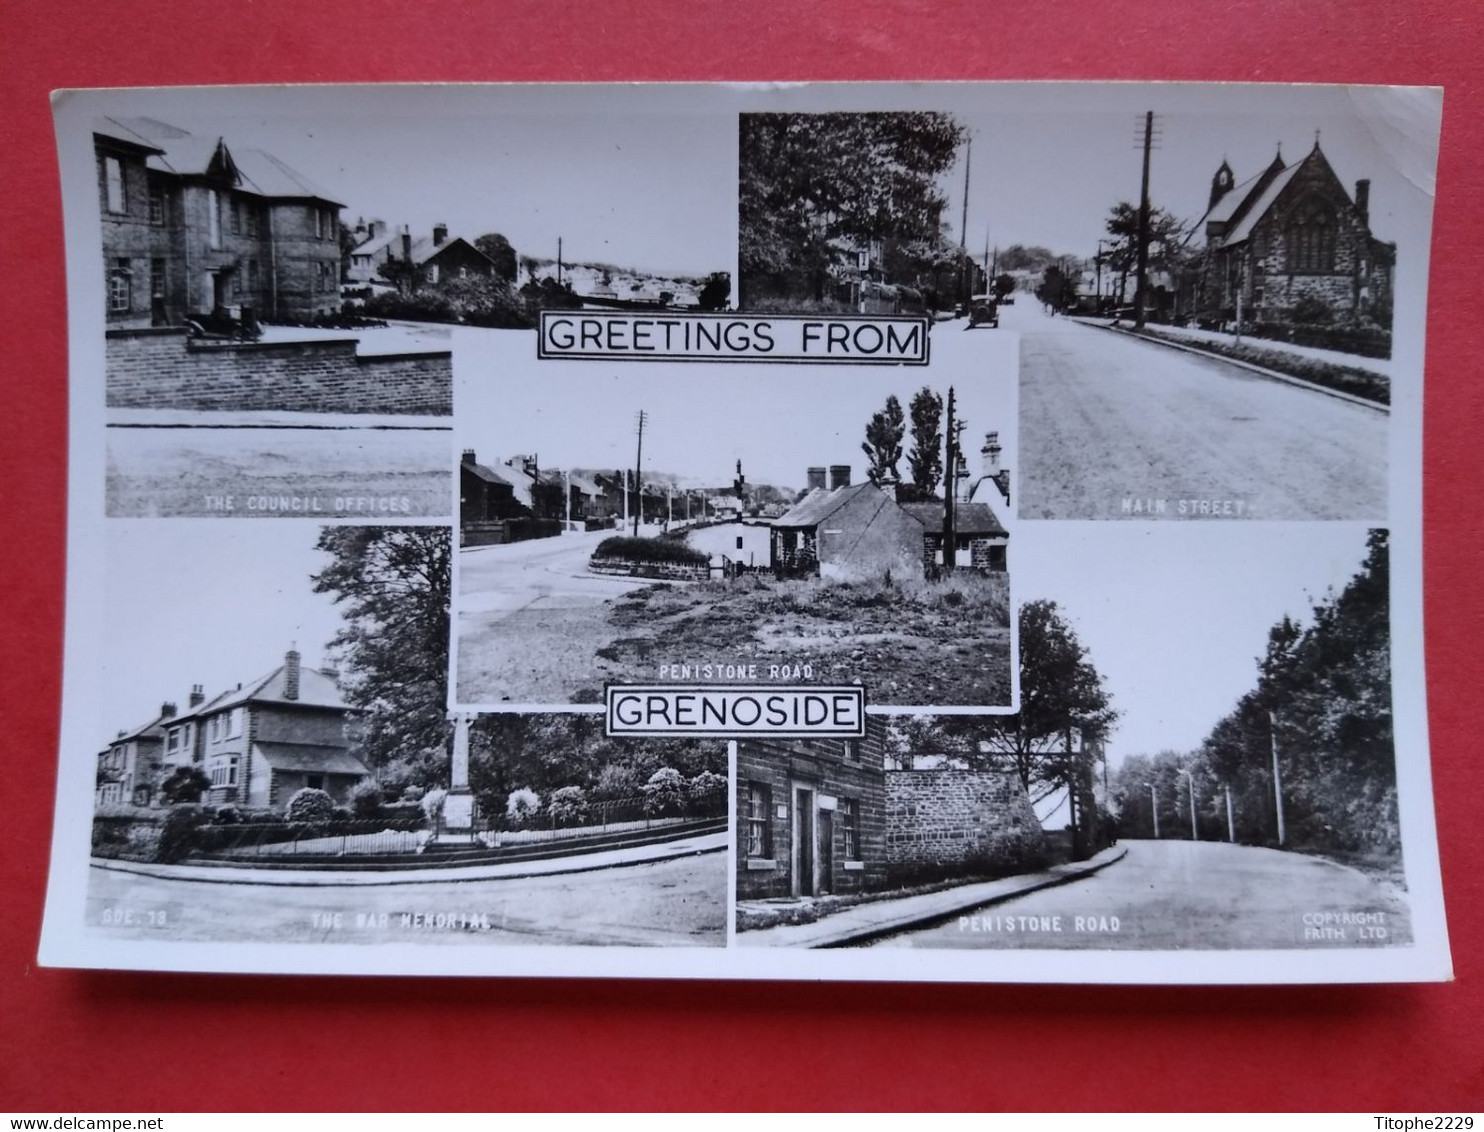 GRENOSIDE - Greetings From Grenoside: Main Street, Penistone Road, The War Memorial, The Council Offices - Sheffield